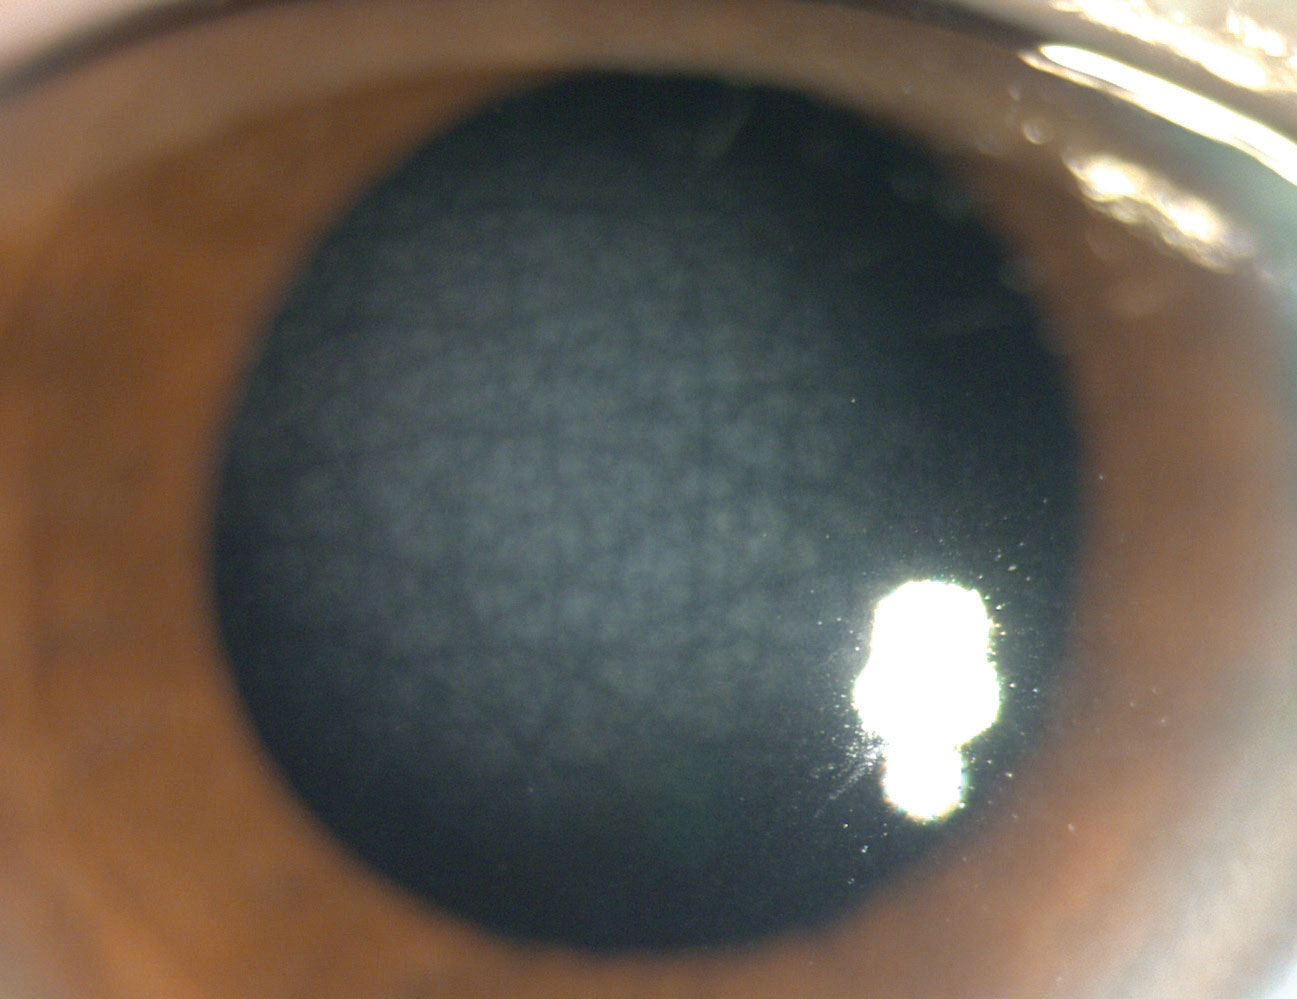 The appearance of central cloudy dystrophy resembles that of crocodile shagreen within the anterior central cornea.